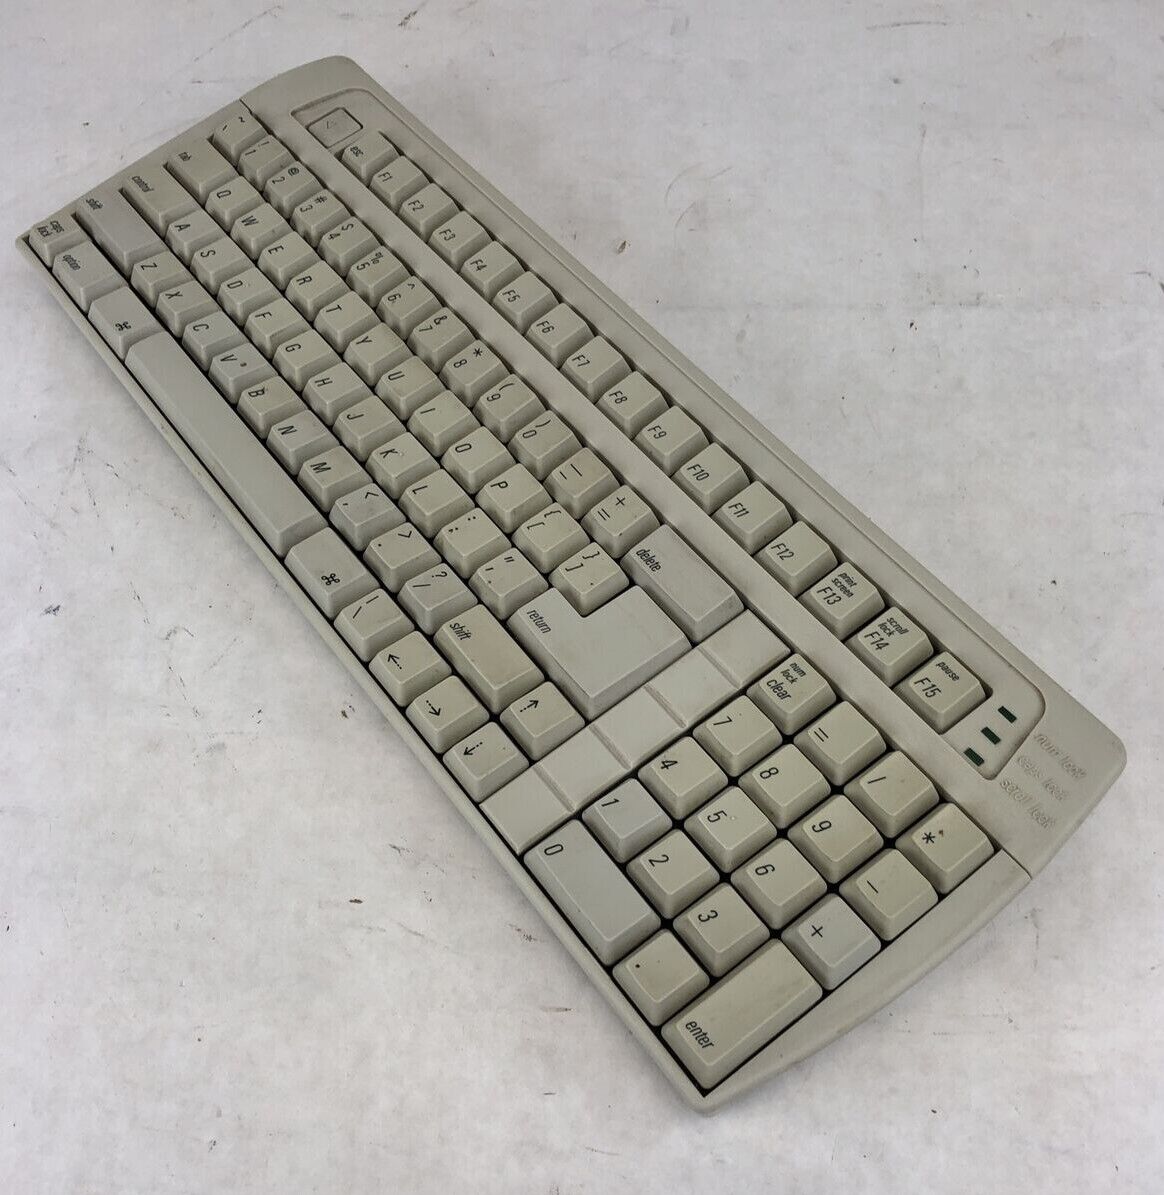 Vintage Techcessories DMK2HUS Wired Keyboard (Cords Not Included)